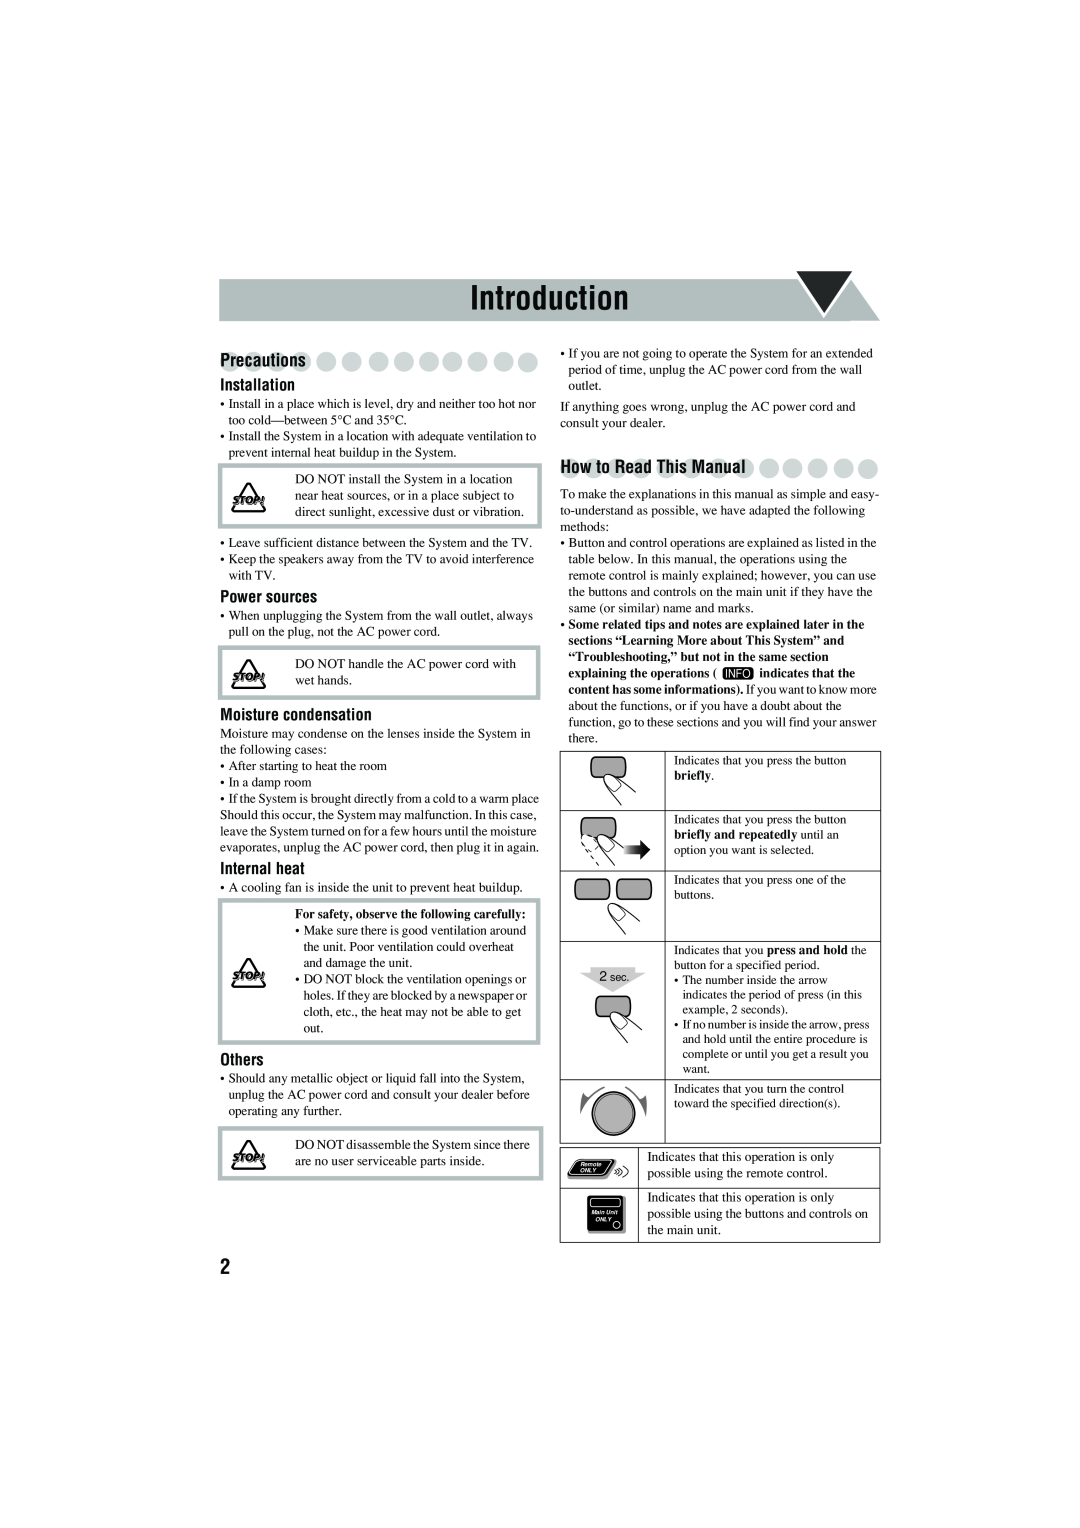 JVC CA-MXJD5 manual Introduction, Precautions, How to Read This Manual, Installation, Power sources, Moisture condensation 